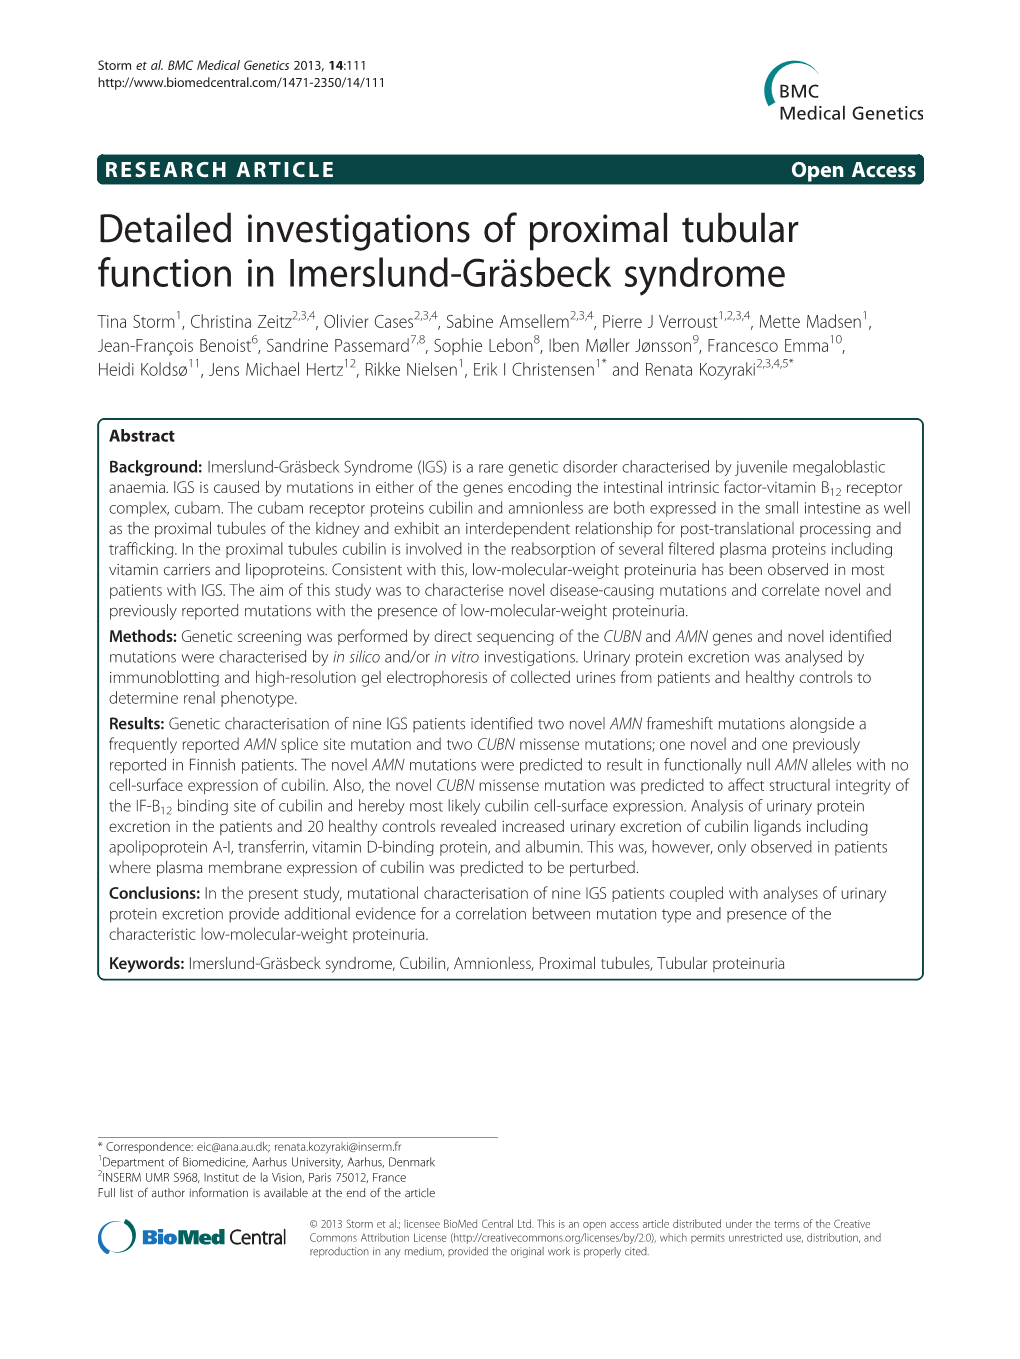 Detailed Investigations of Proximal Tubular Function in Imerslund-Gräsbeck Syndrome